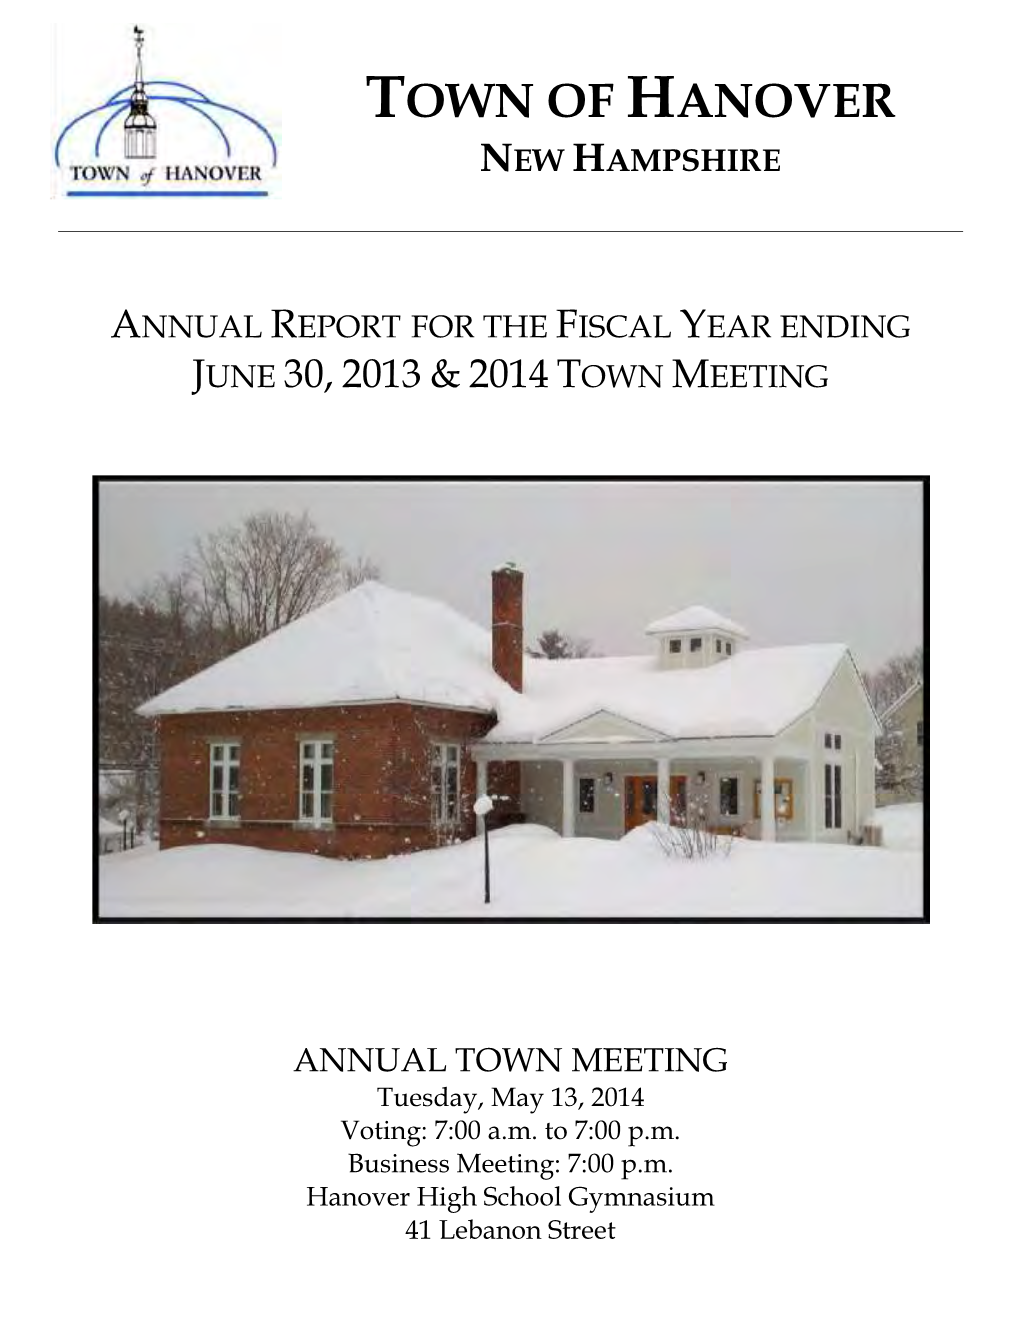 New Hampshire Annual Report for the Fiscal Year Ending June 30, 2013 & 2014 Town Meeting